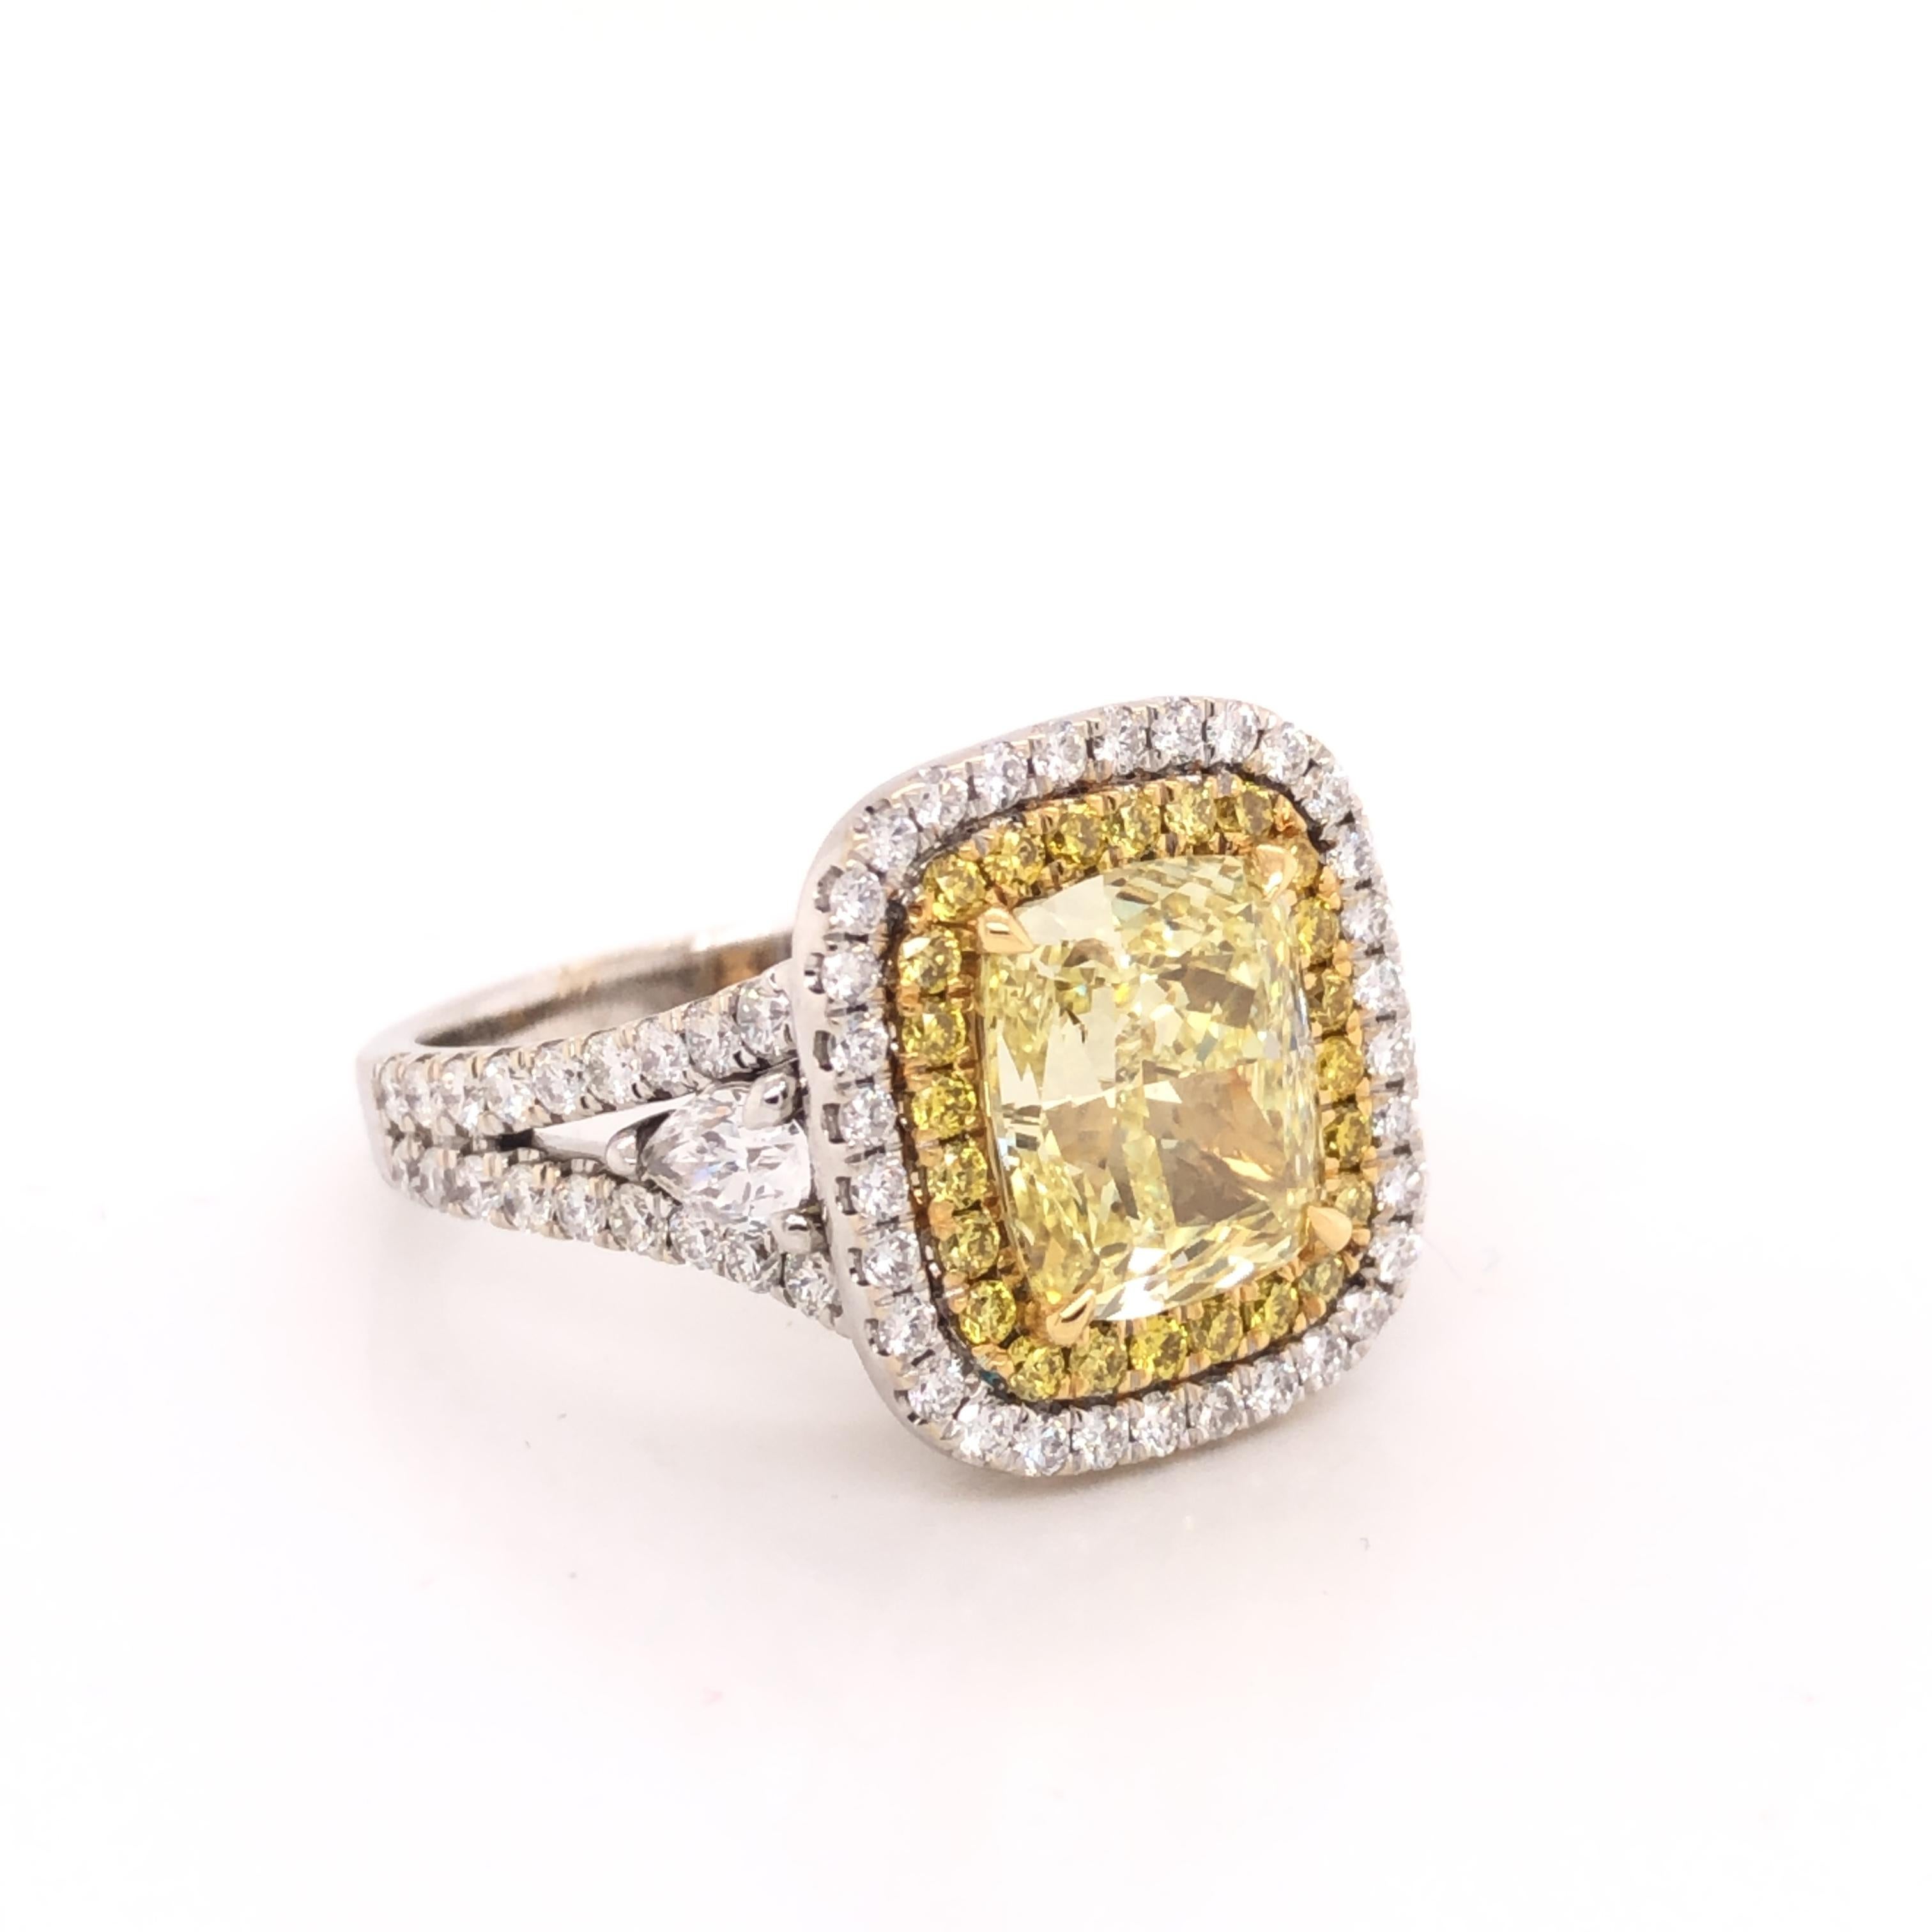 Beautifully hand crafted ring in 18k white gold. The focal point of the ring is one GIA certified fancy intense yellow cushion cut diamond. Fancy colored diamonds are extremely rare as the color grade fancy intense is the most sought after shade of